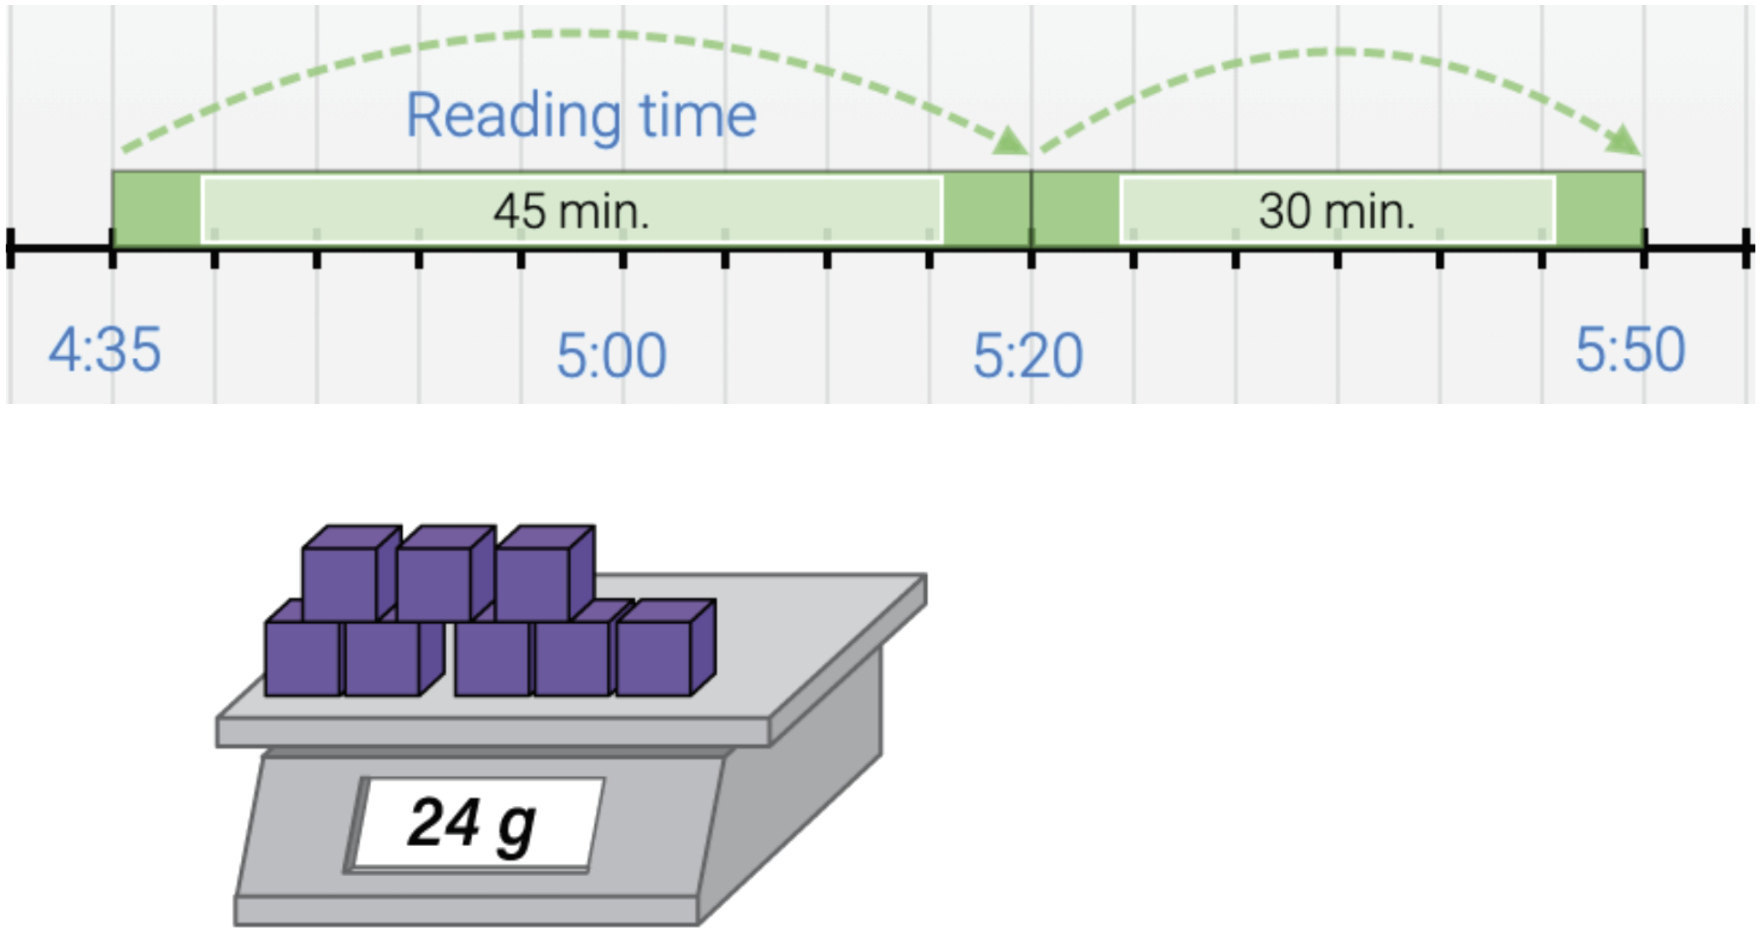 1st, a number line showing reading times. 4:35 jumps 45 minutes to 5:20. Then jumps 30 minutes to 5:50. Next, 8 purple cubes on a scale showing 24 grams